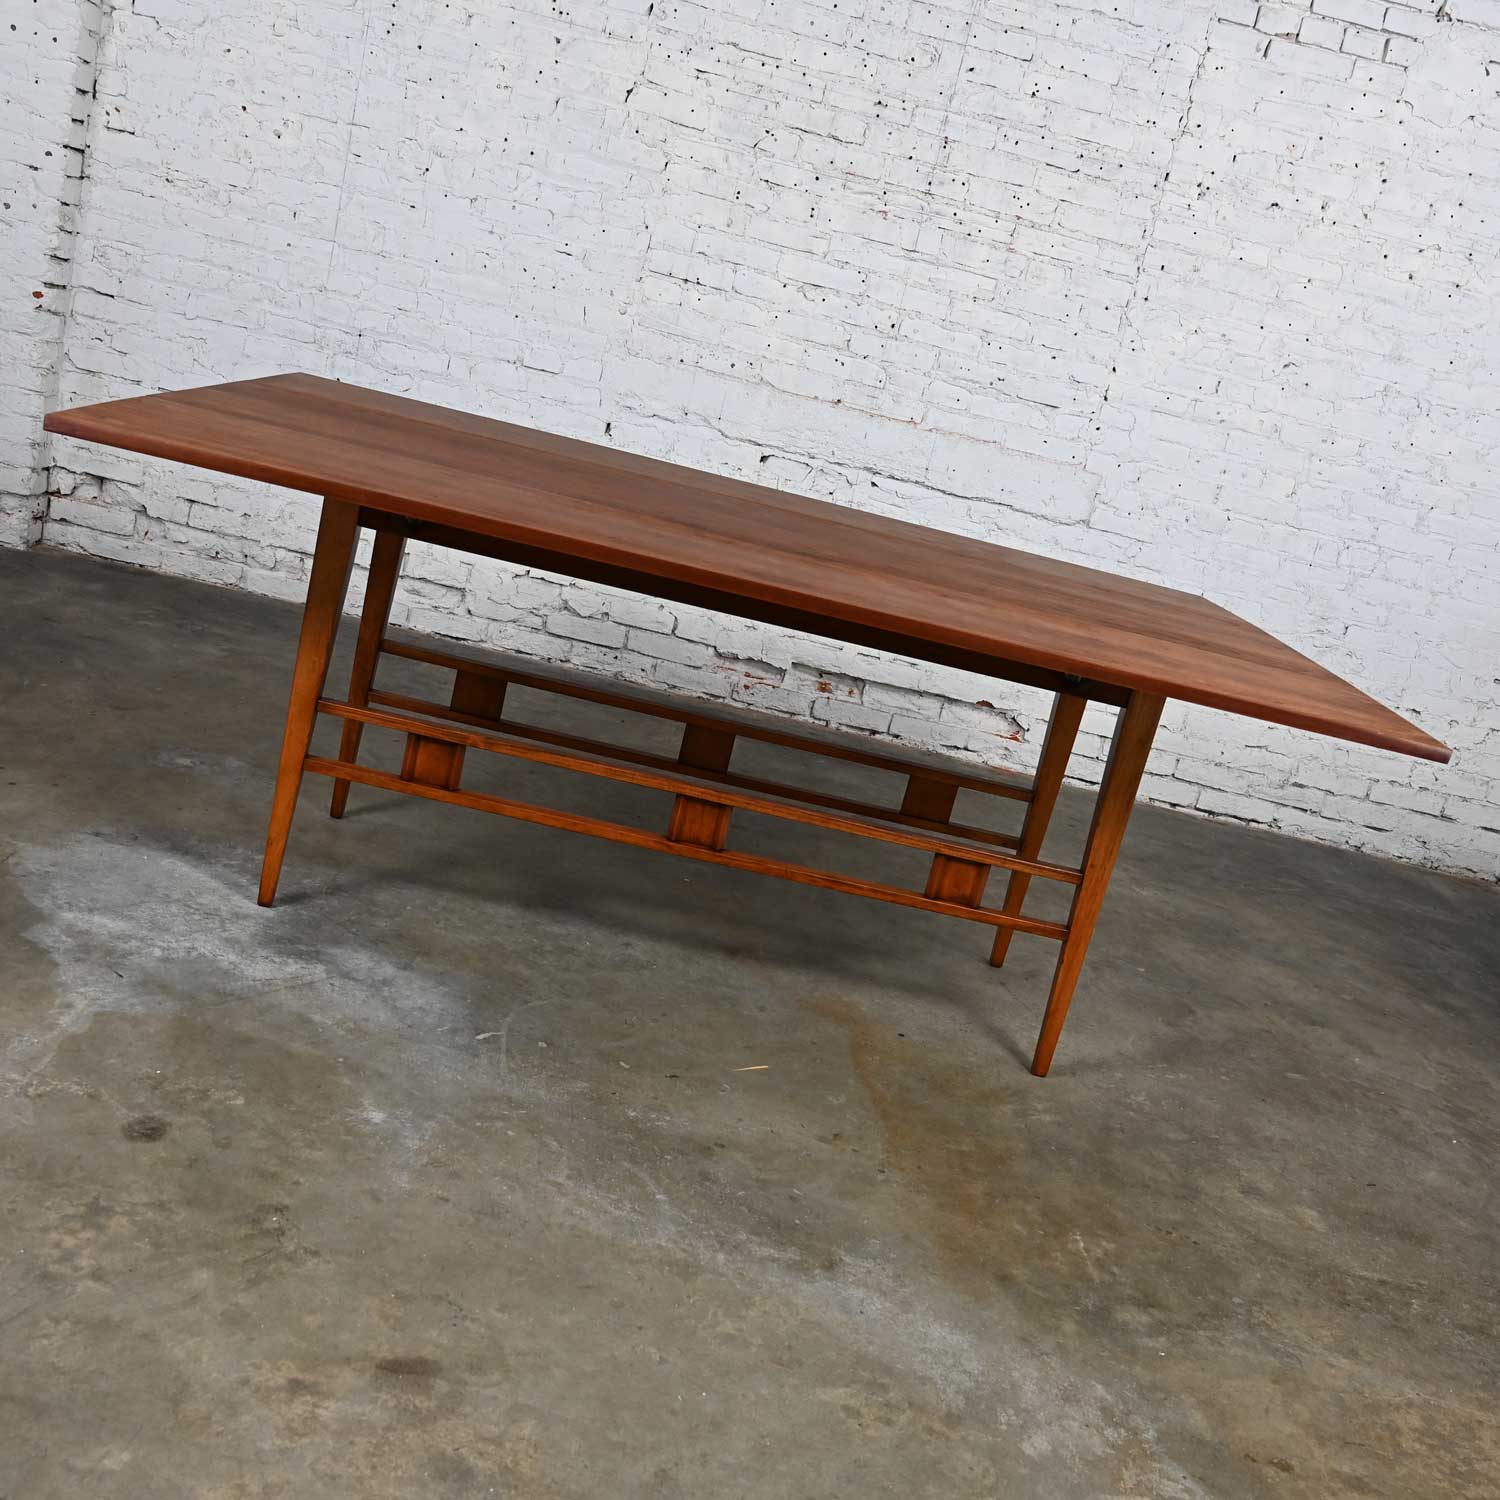 Vintage Mid-Century Modern Maple Drop Leaf Dining Table Attributed to Statesville Chair Company